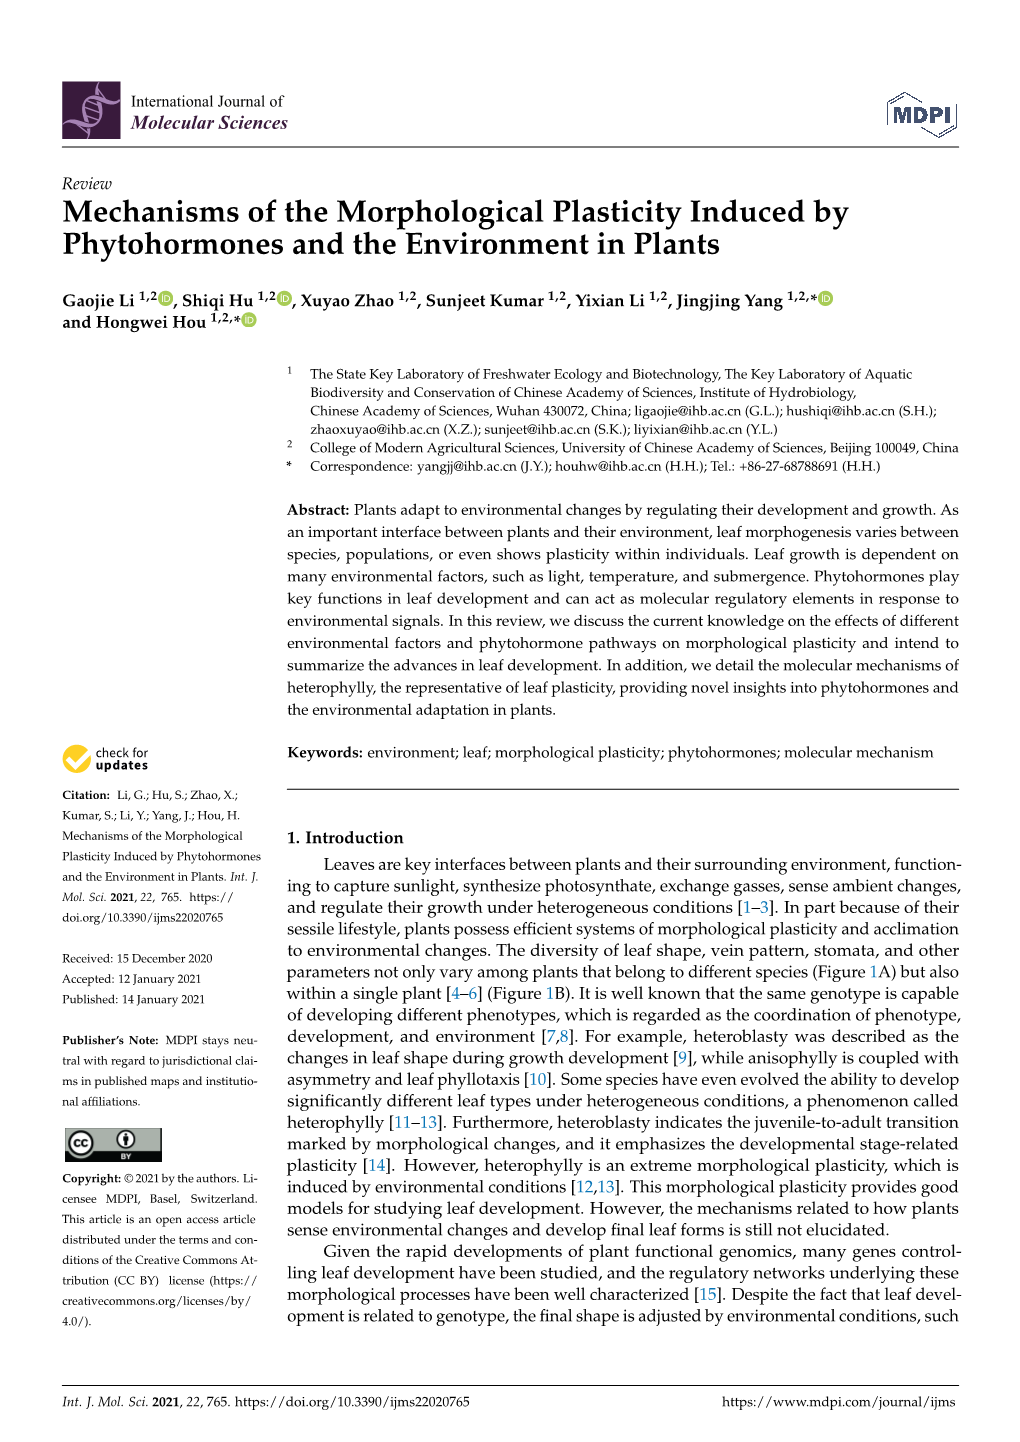 Mechanisms of the Morphological Plasticity Induced by Phytohormones and the Environment in Plants